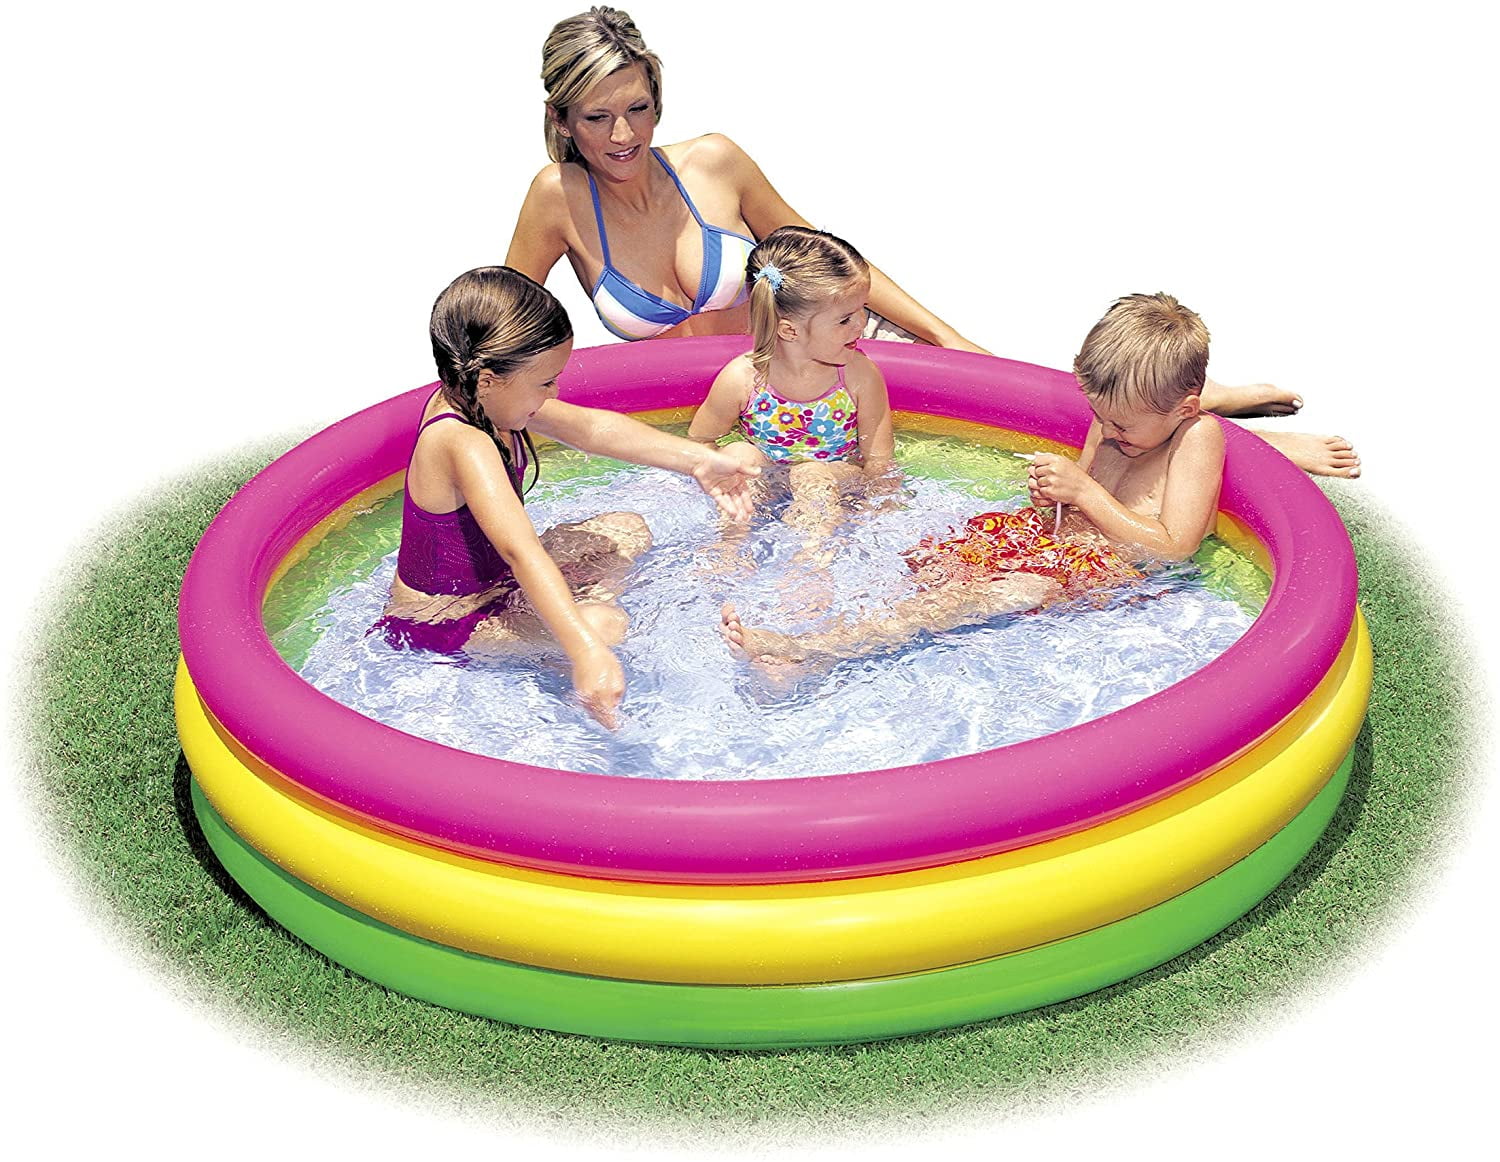 Inflatable Swimming Pool 45" x 10" Sunset Flow 3 Ring Childrens Paddling Play 